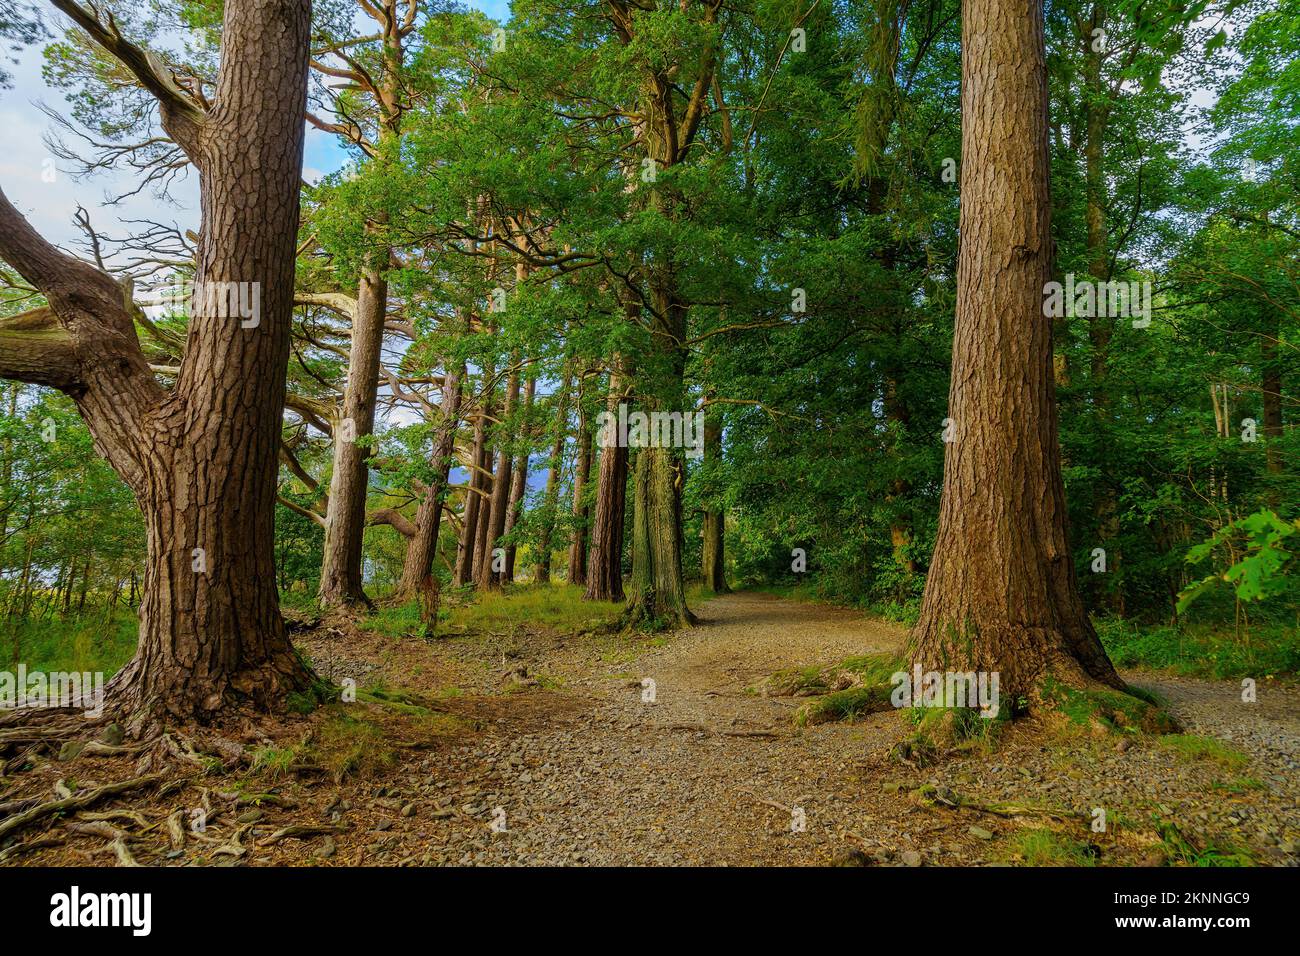 View of a footpath among trees in Calfclose Bay, near Keswick, in the Lake District, Cumbria, England, UK Stock Photo